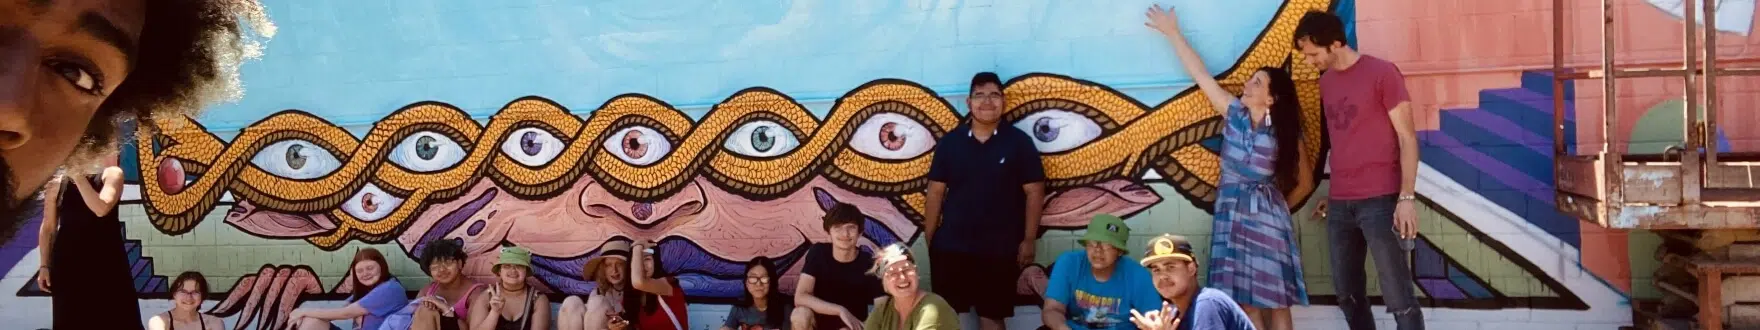 Hanging out in front of a mural